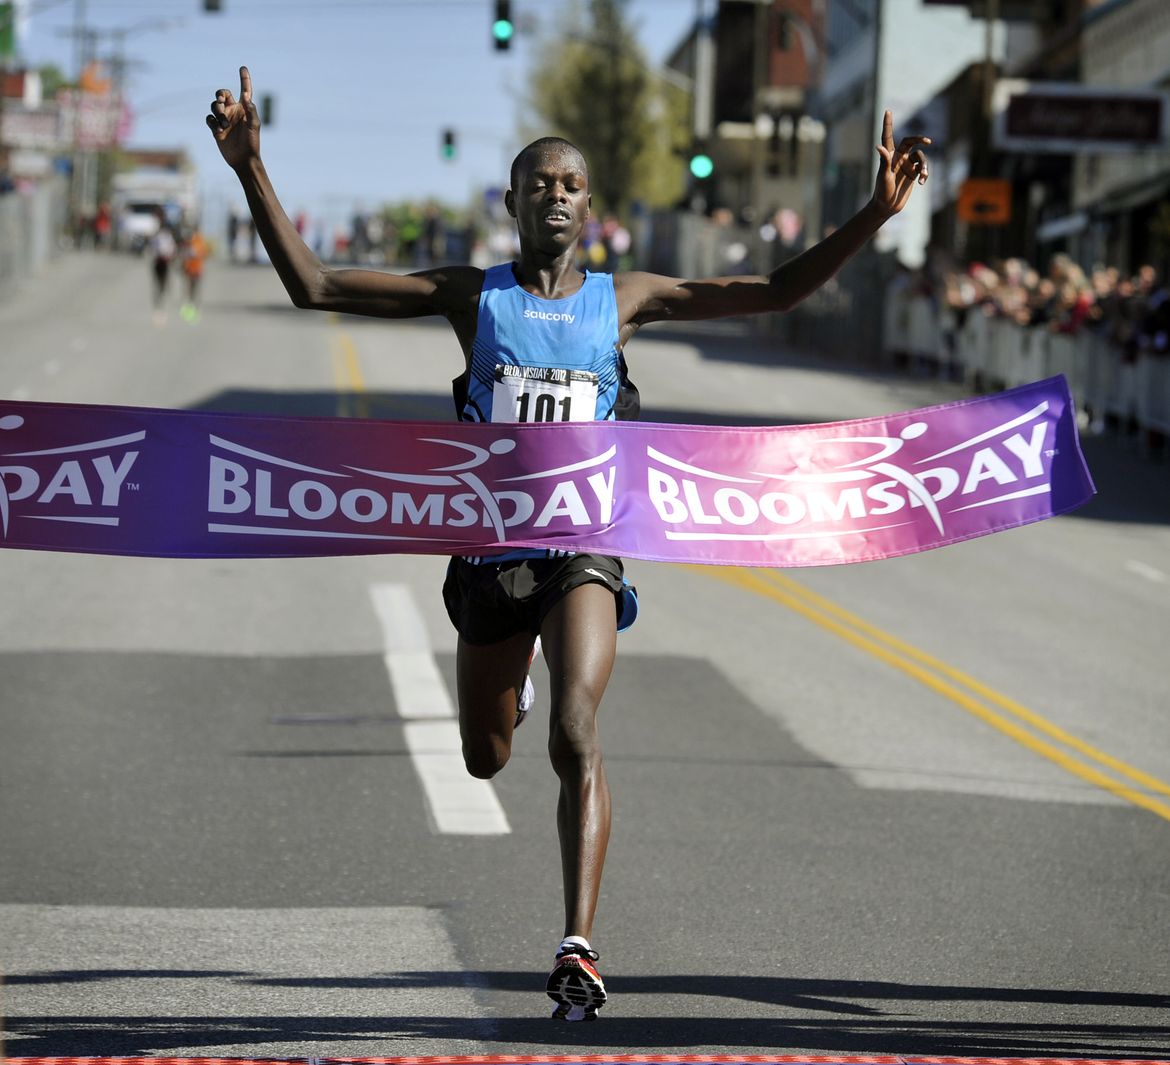 Bloomsday 2012 - A picture story at The Spokesman-Review